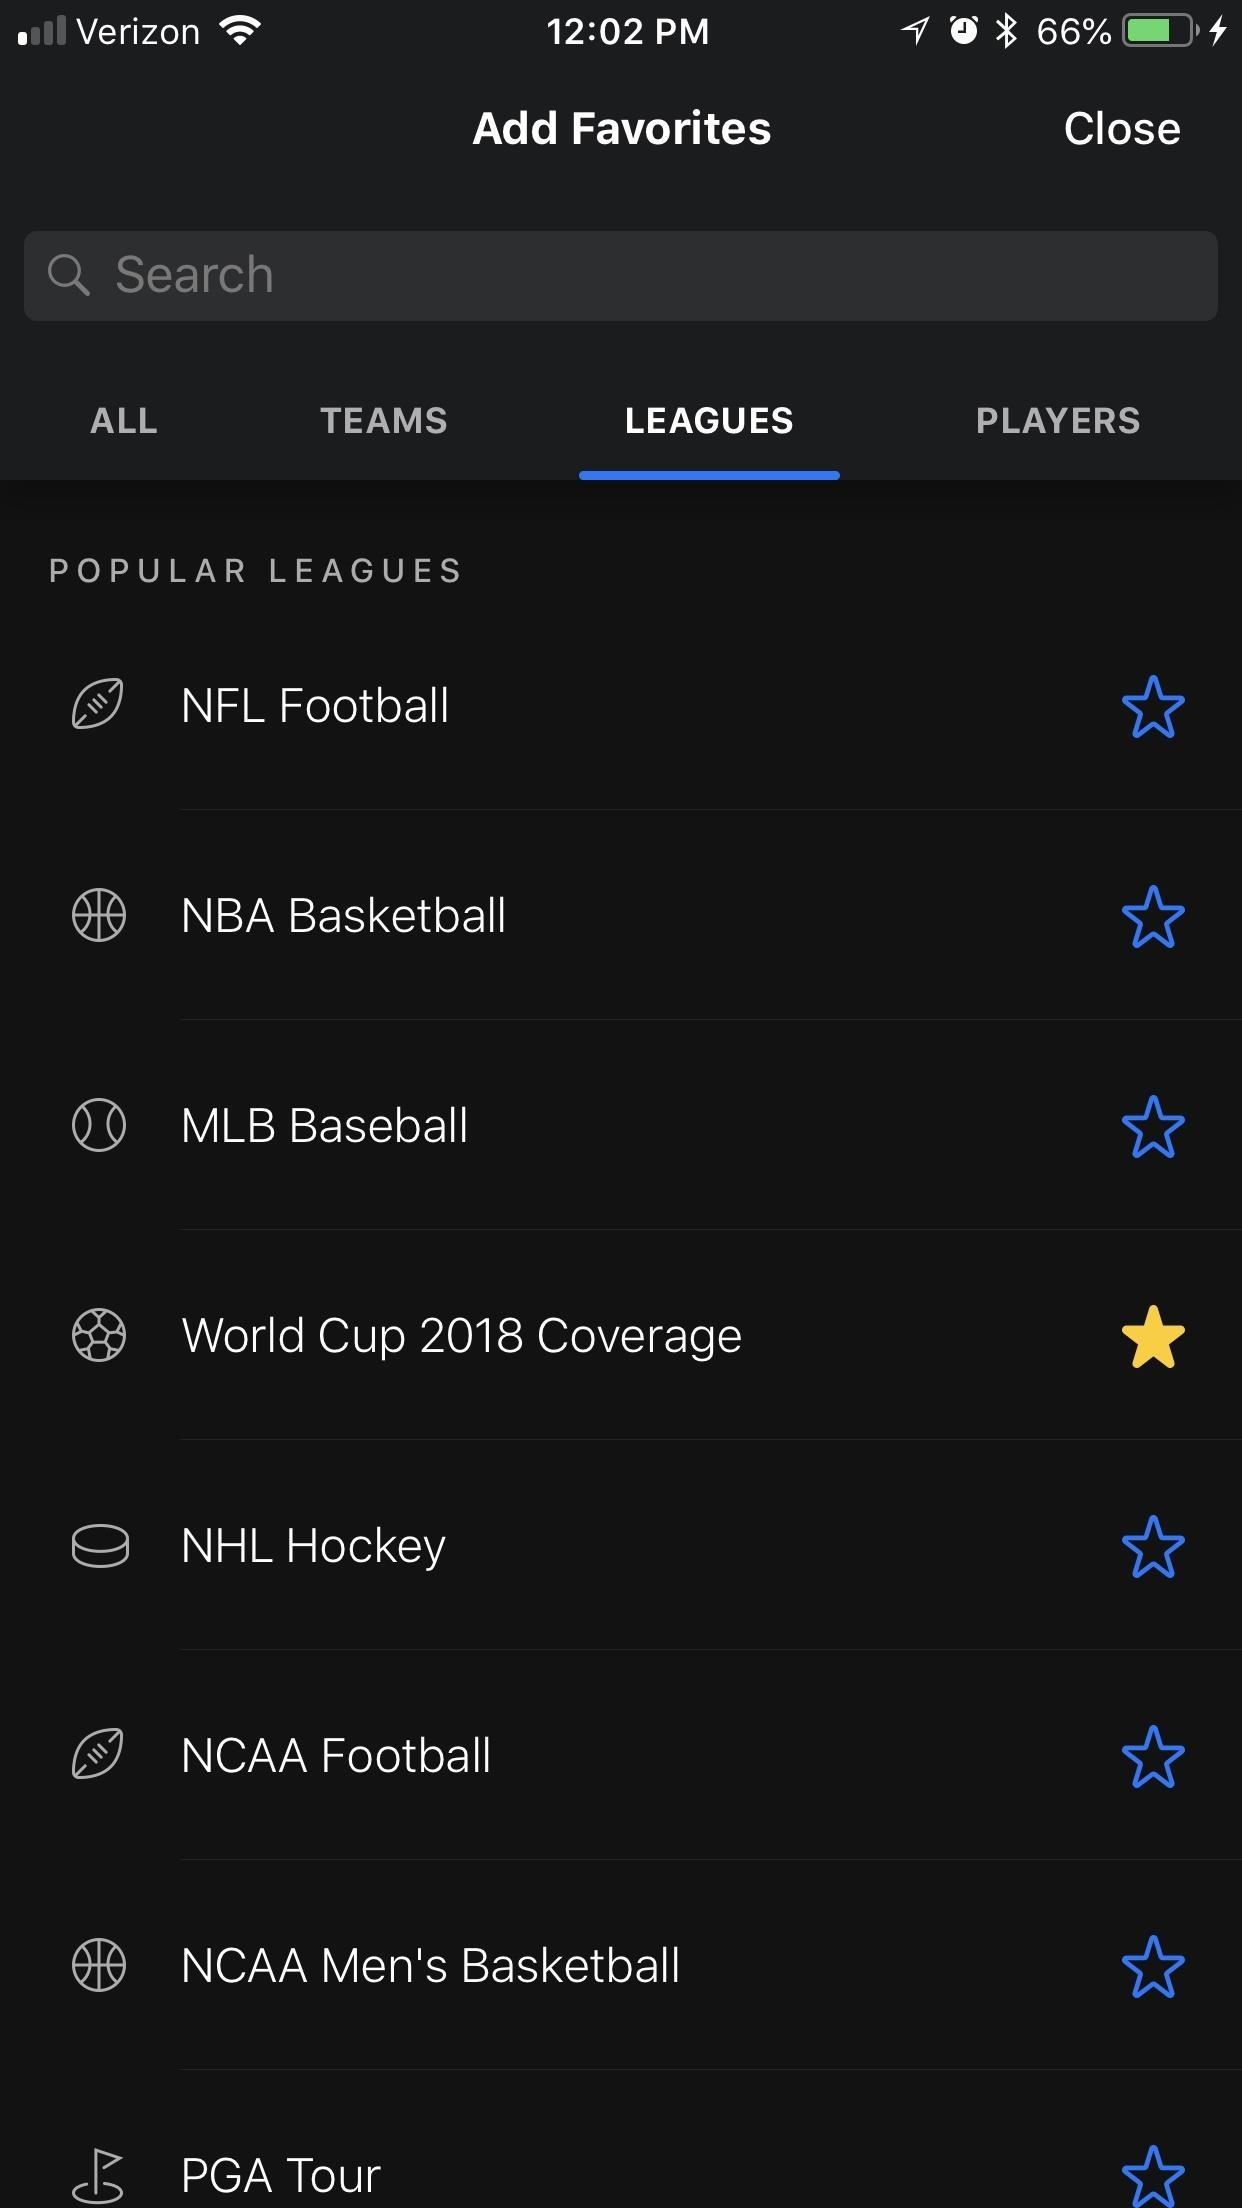 The Best Way to Keep Up with World Cup News & Scores on Your Phone